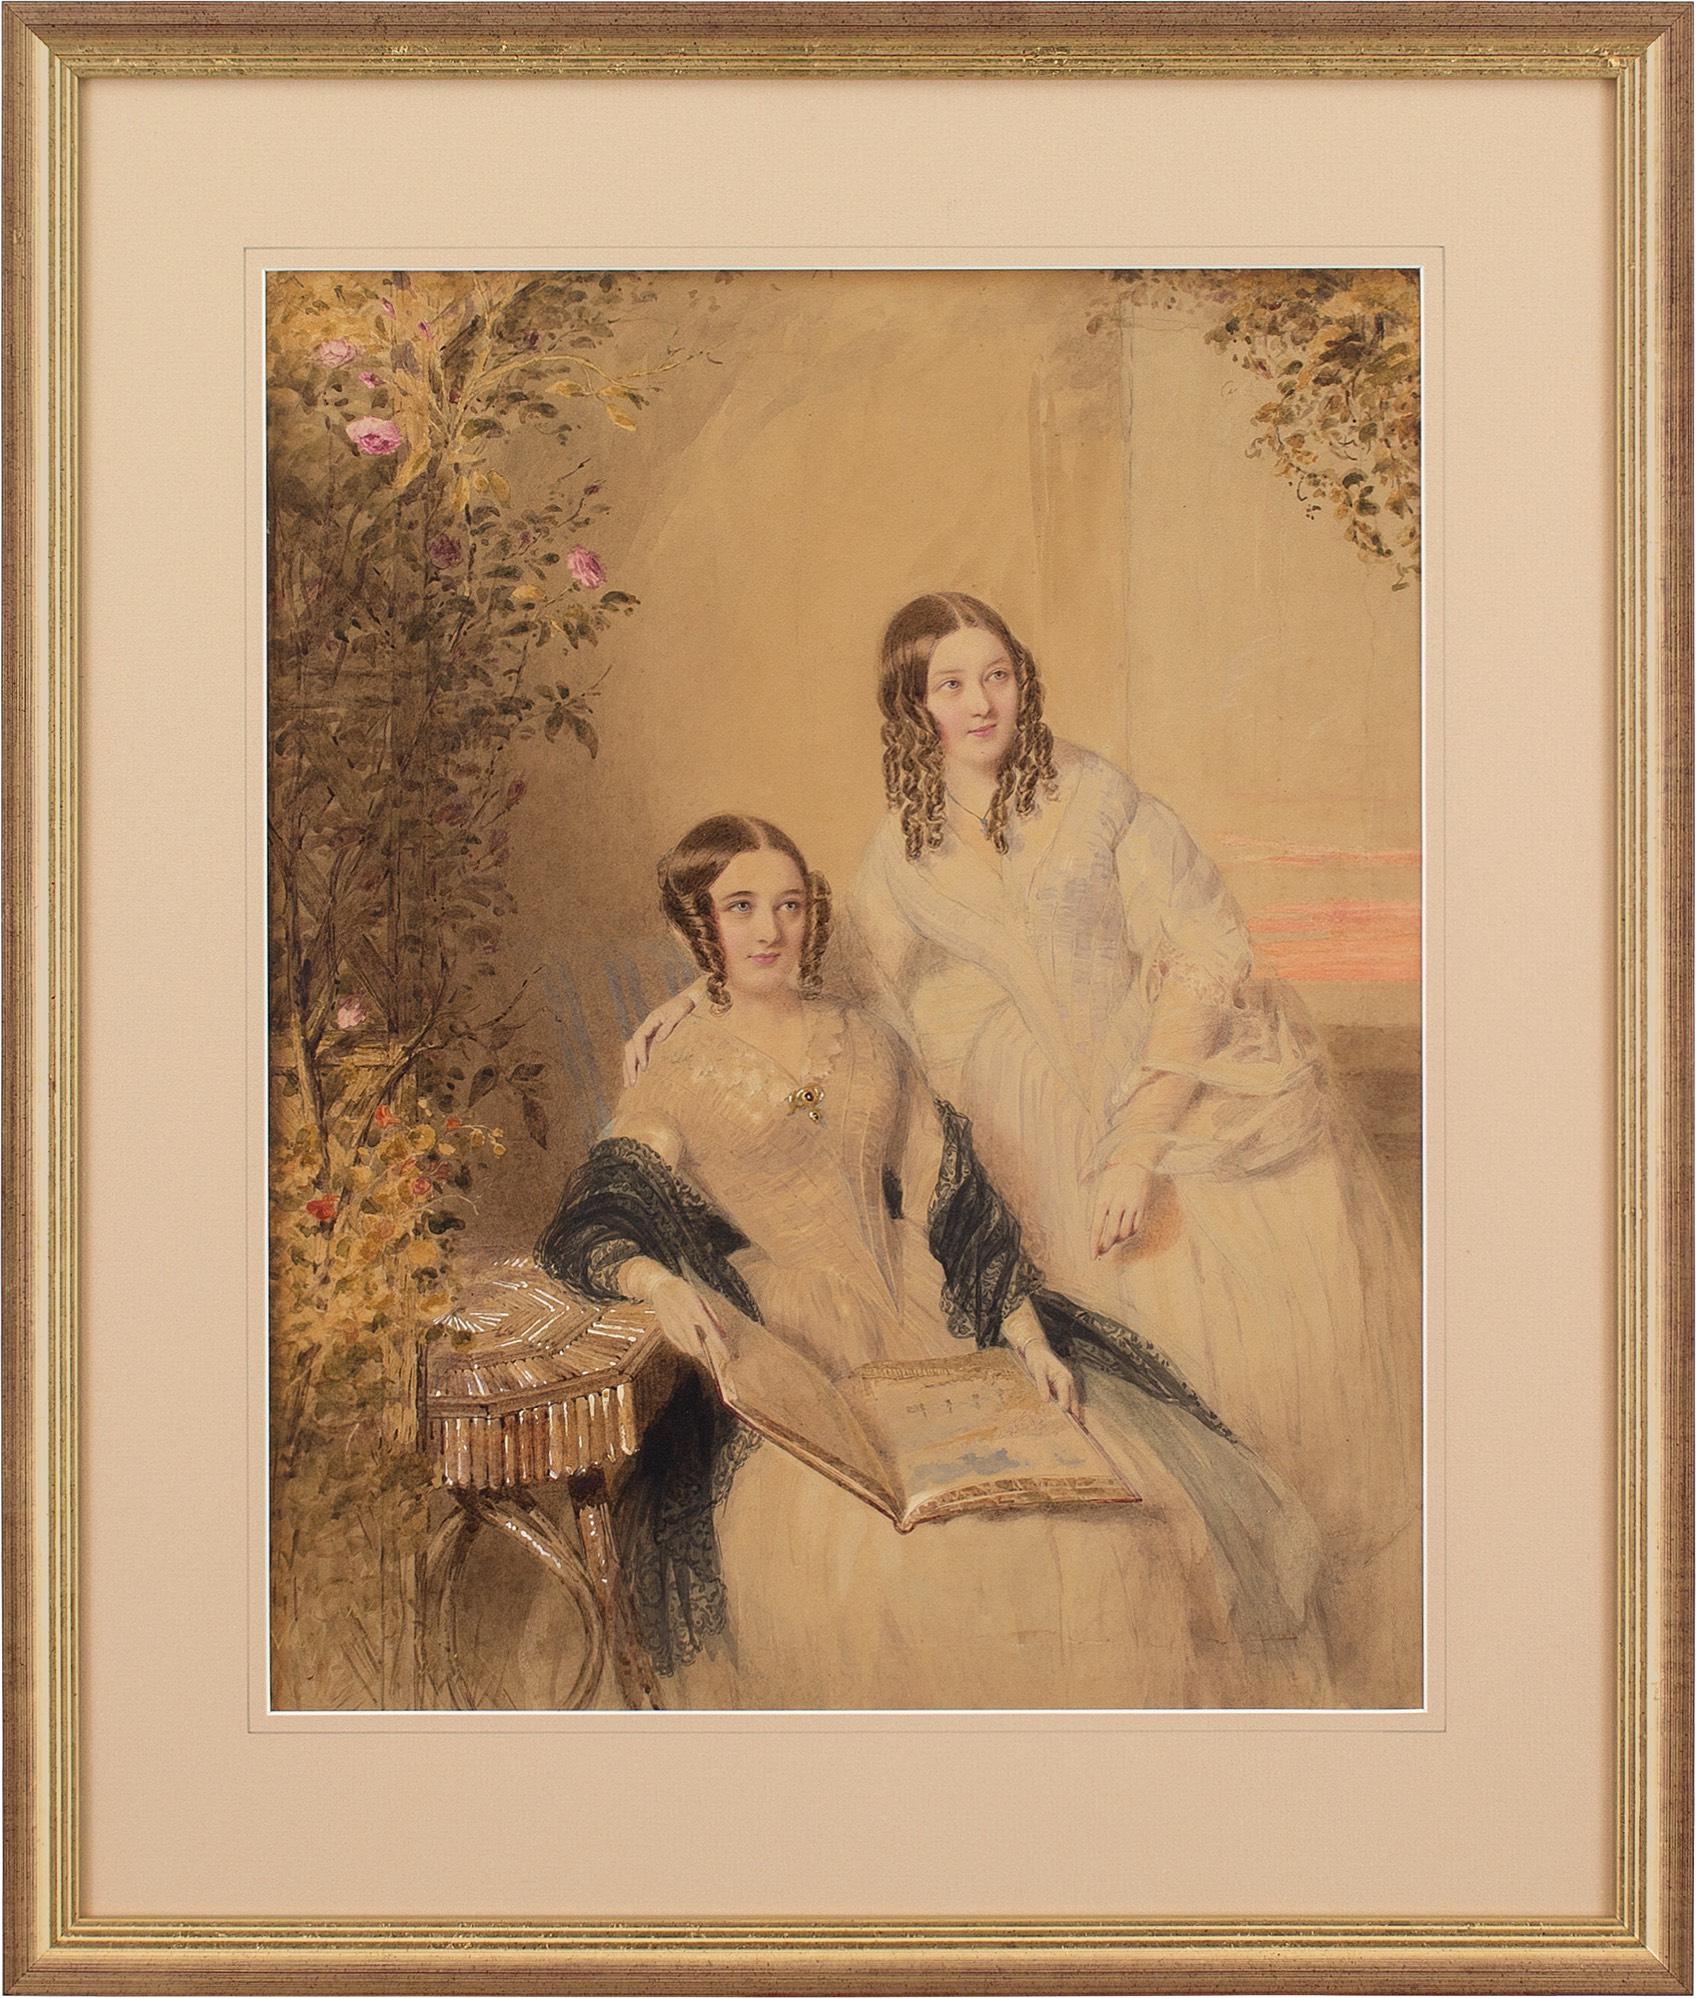 William Drummond, Portrait Of Two Sisters, Watercolour - Art by William Drummond (artist)